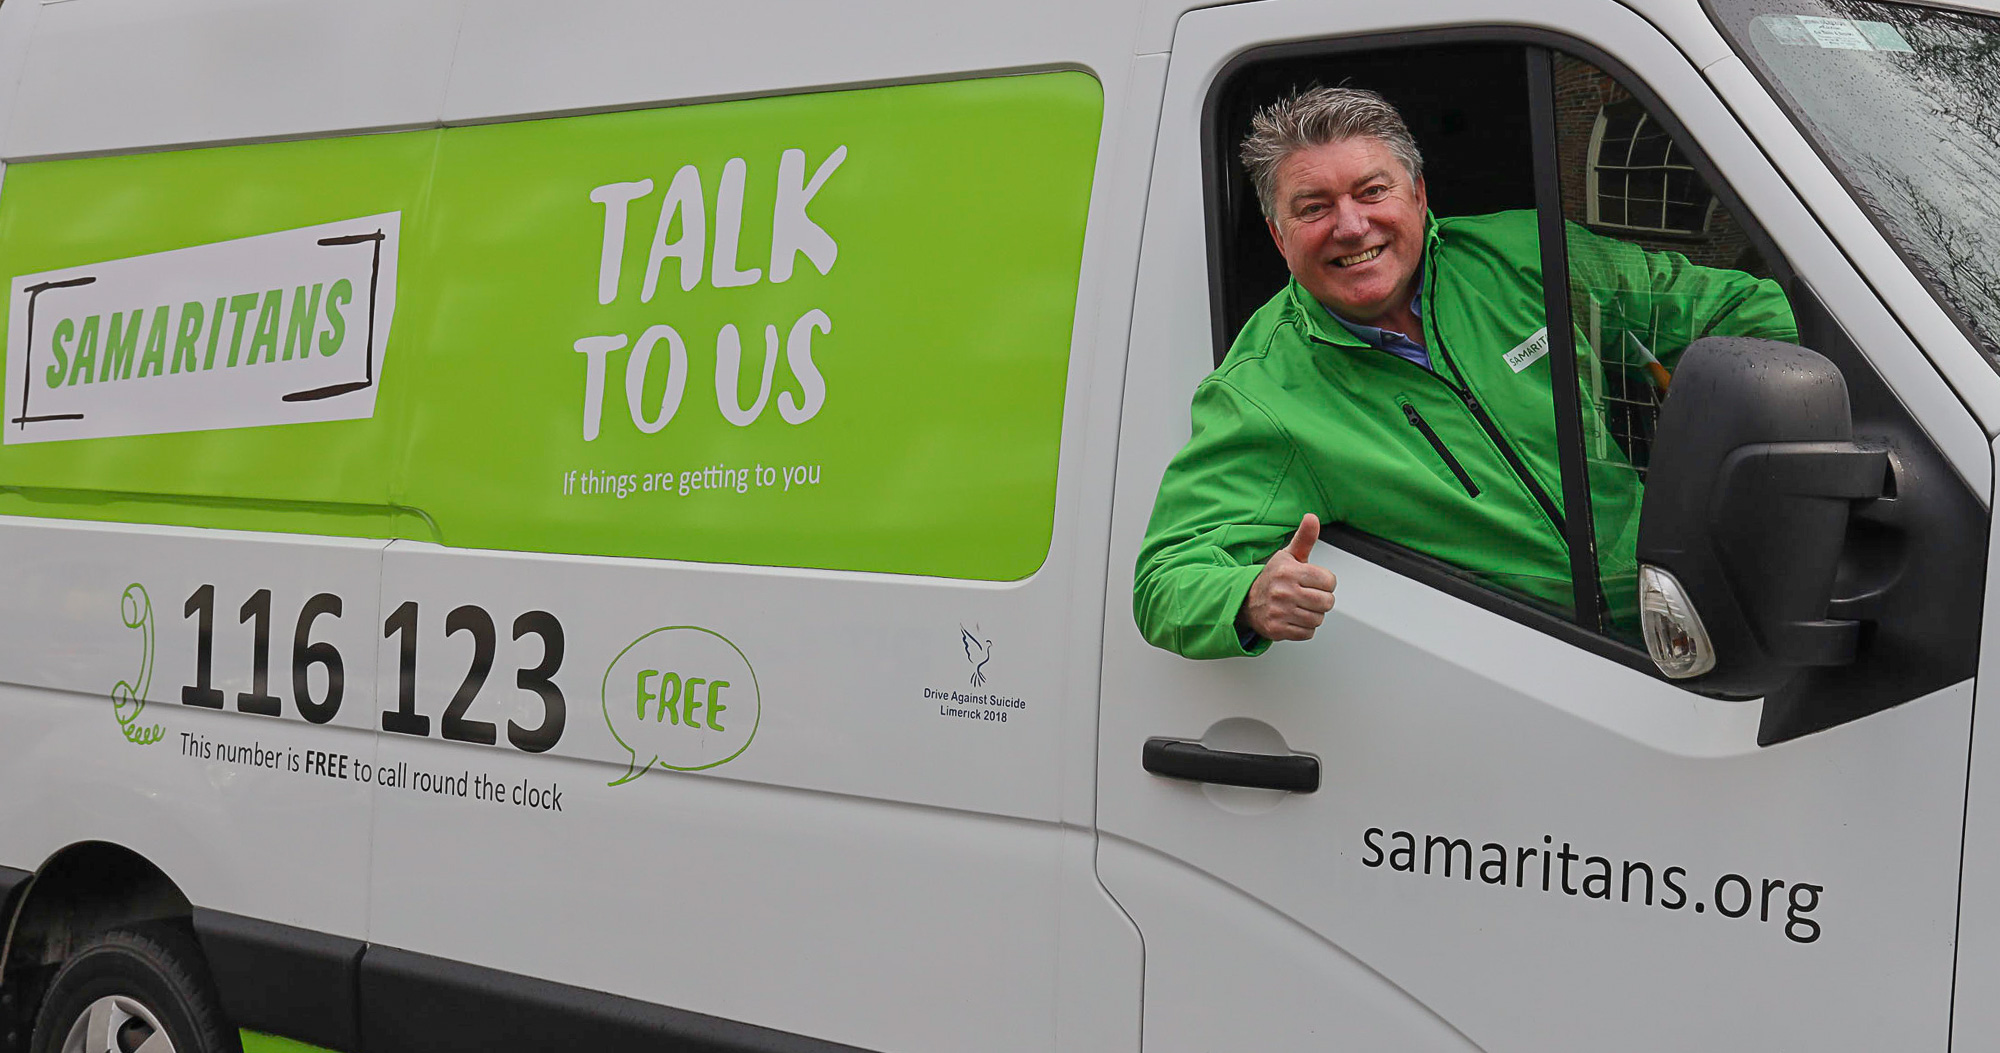 Samaritans Ambassador Pat Shortt is urging the public to talk to the charity if they are finding it difficult to cope.